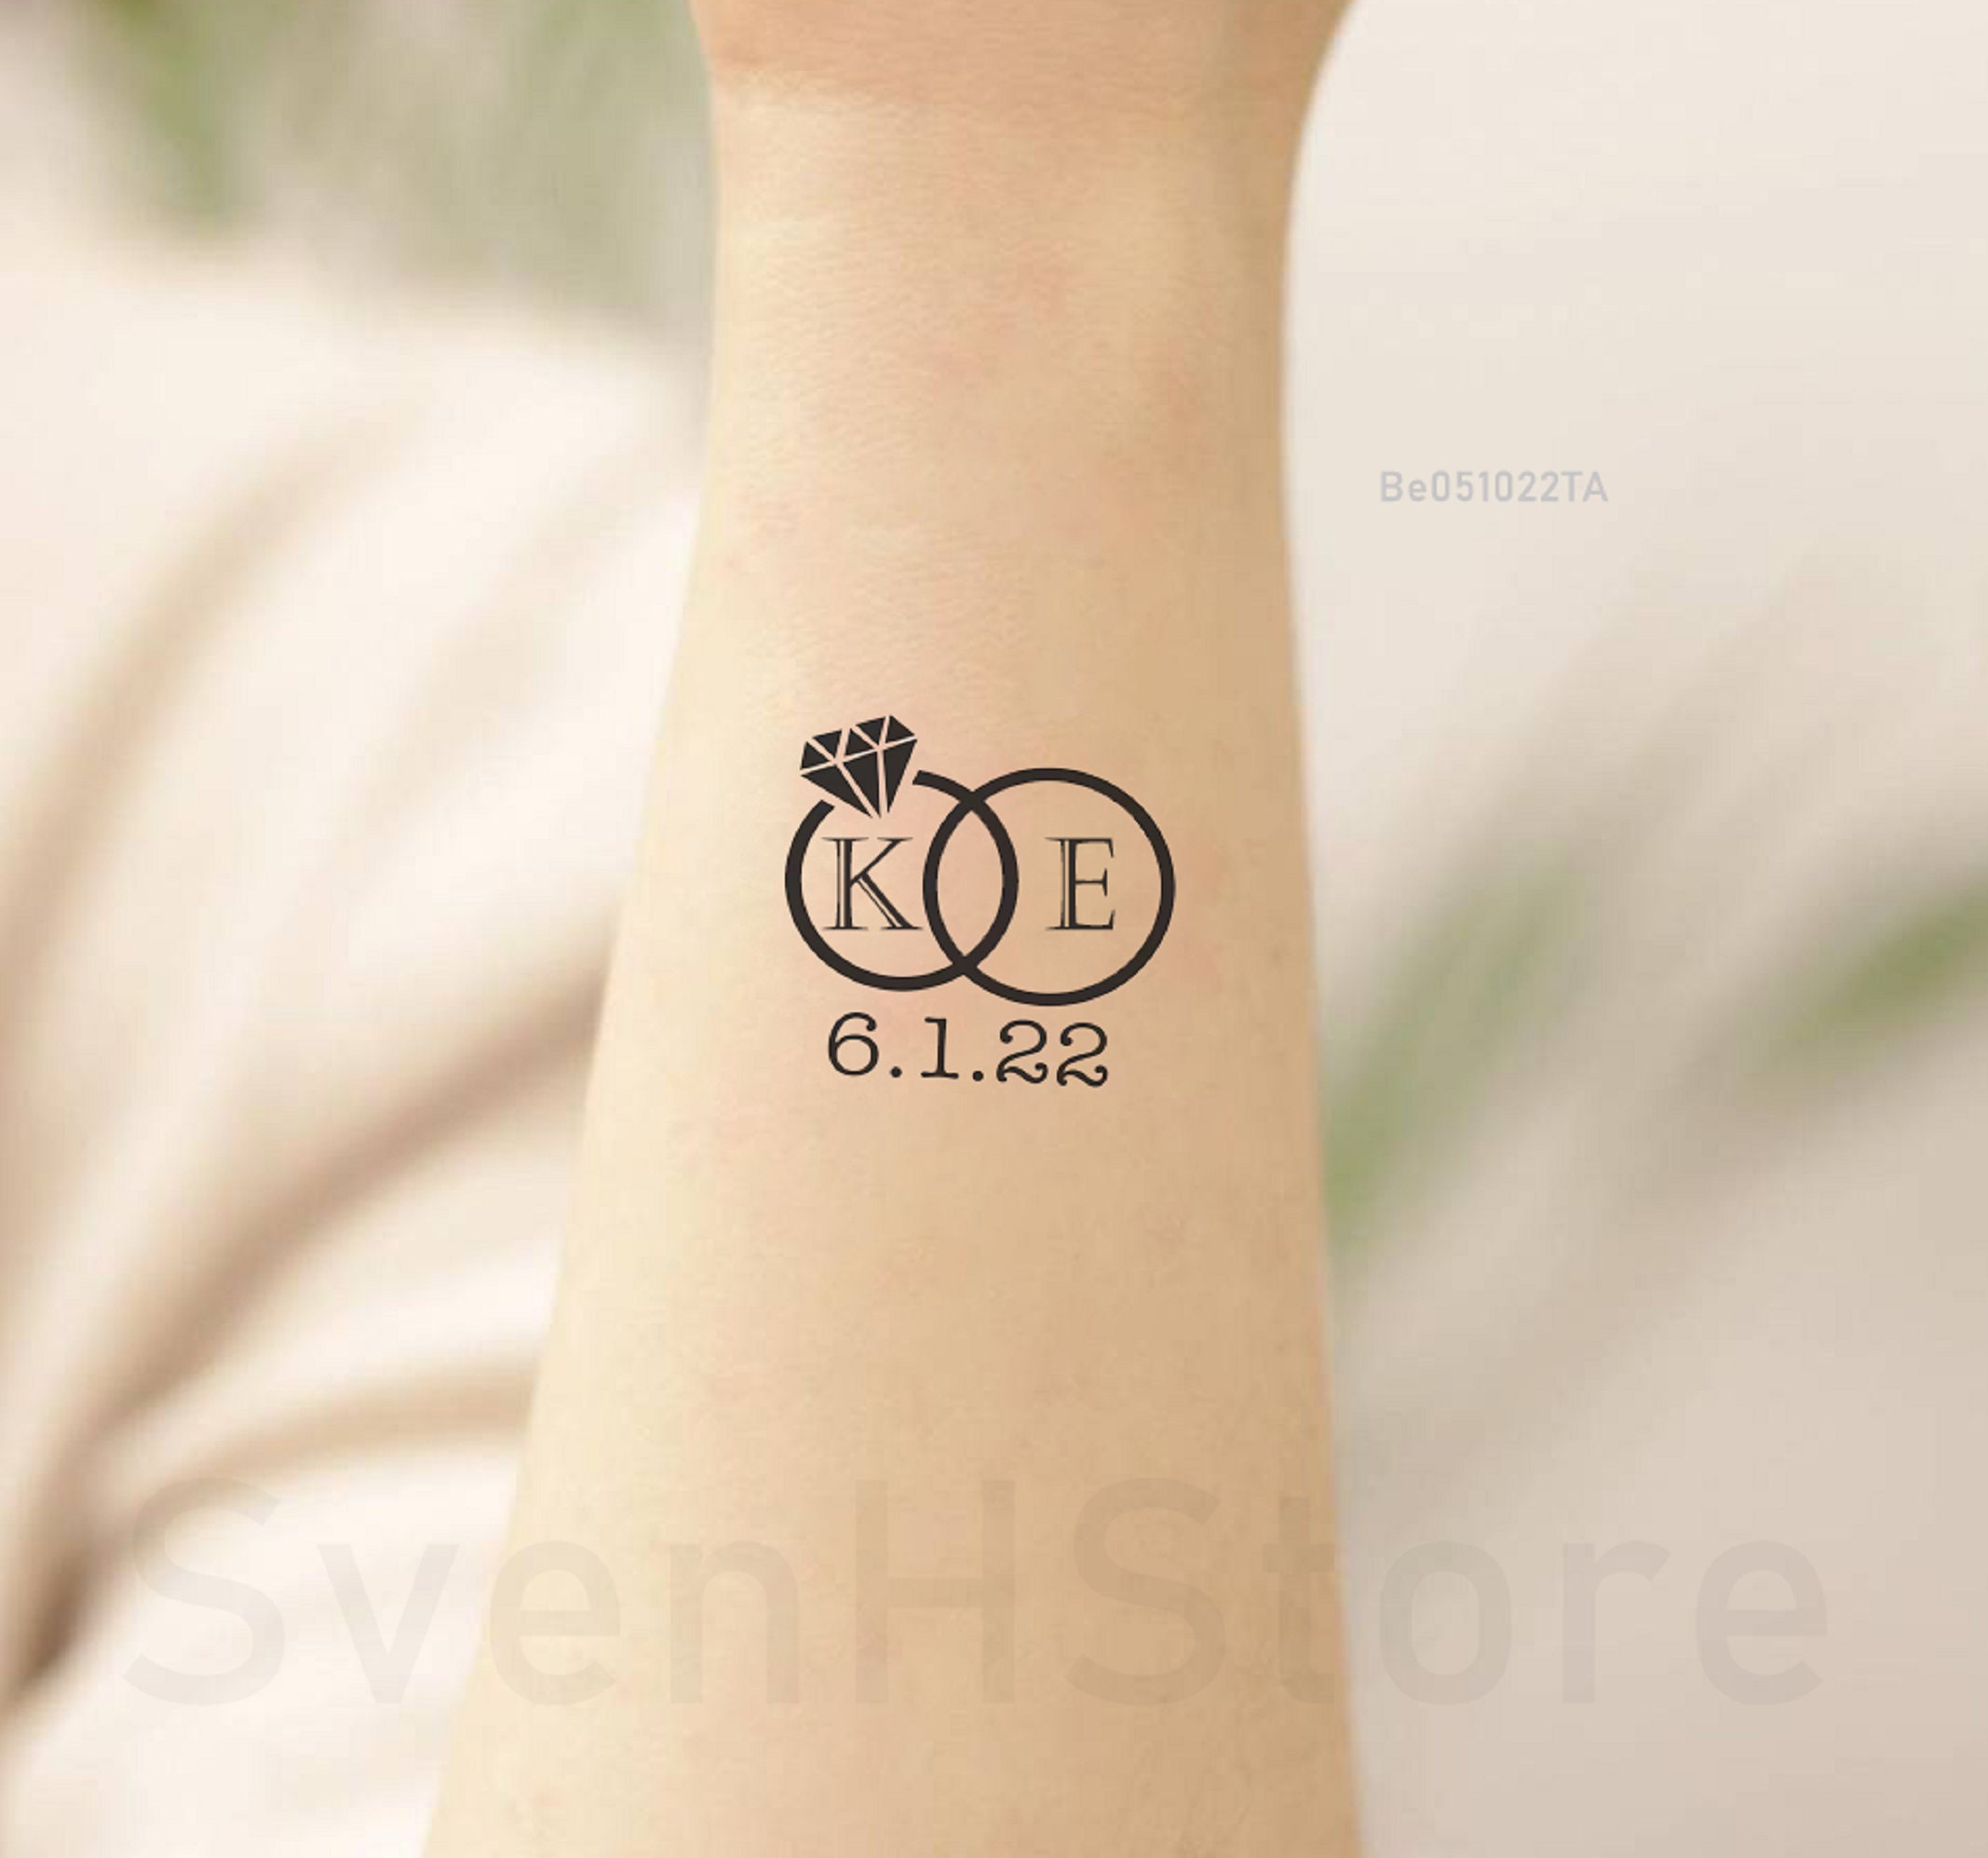 Meaningful Tattoo Ideas For Moms to Pay Homage to Their Kids